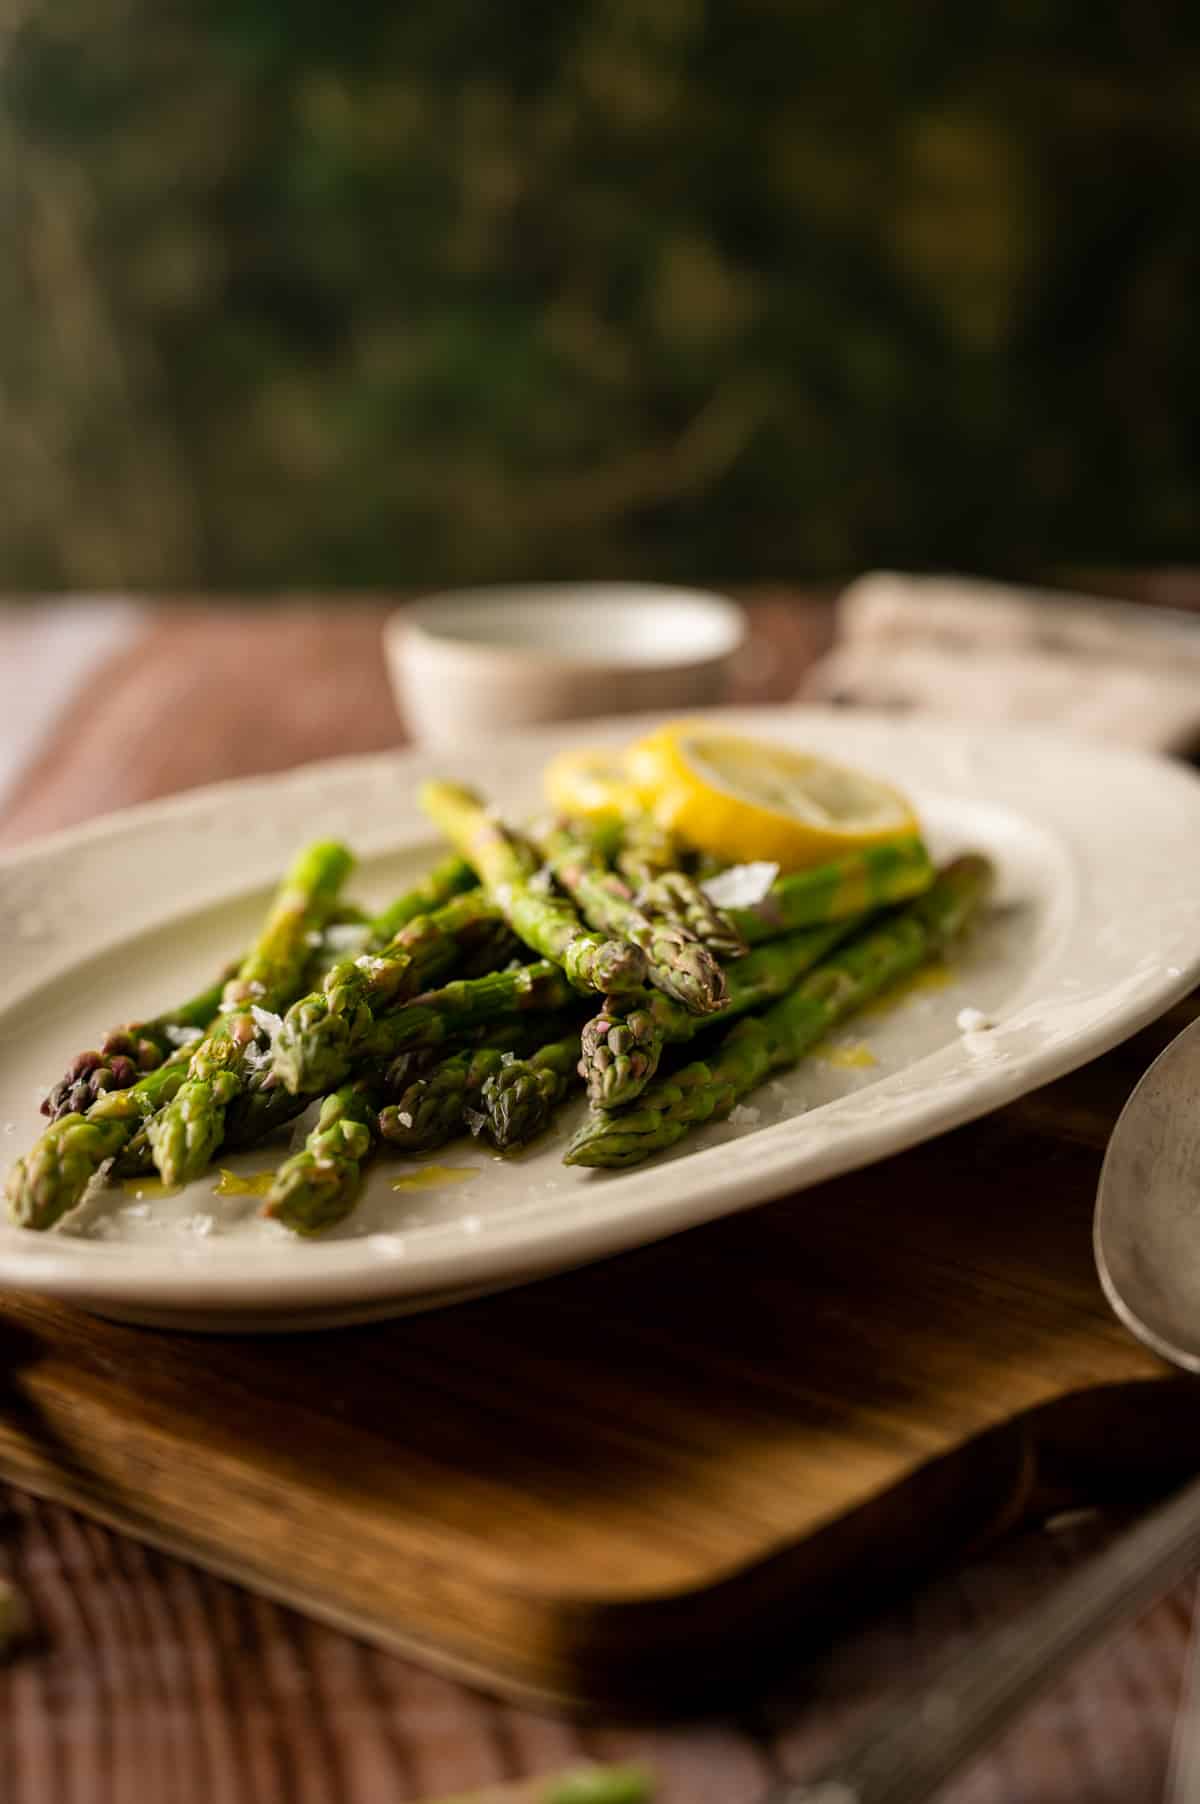 Angle view of cooked asparagus on a oval plate.